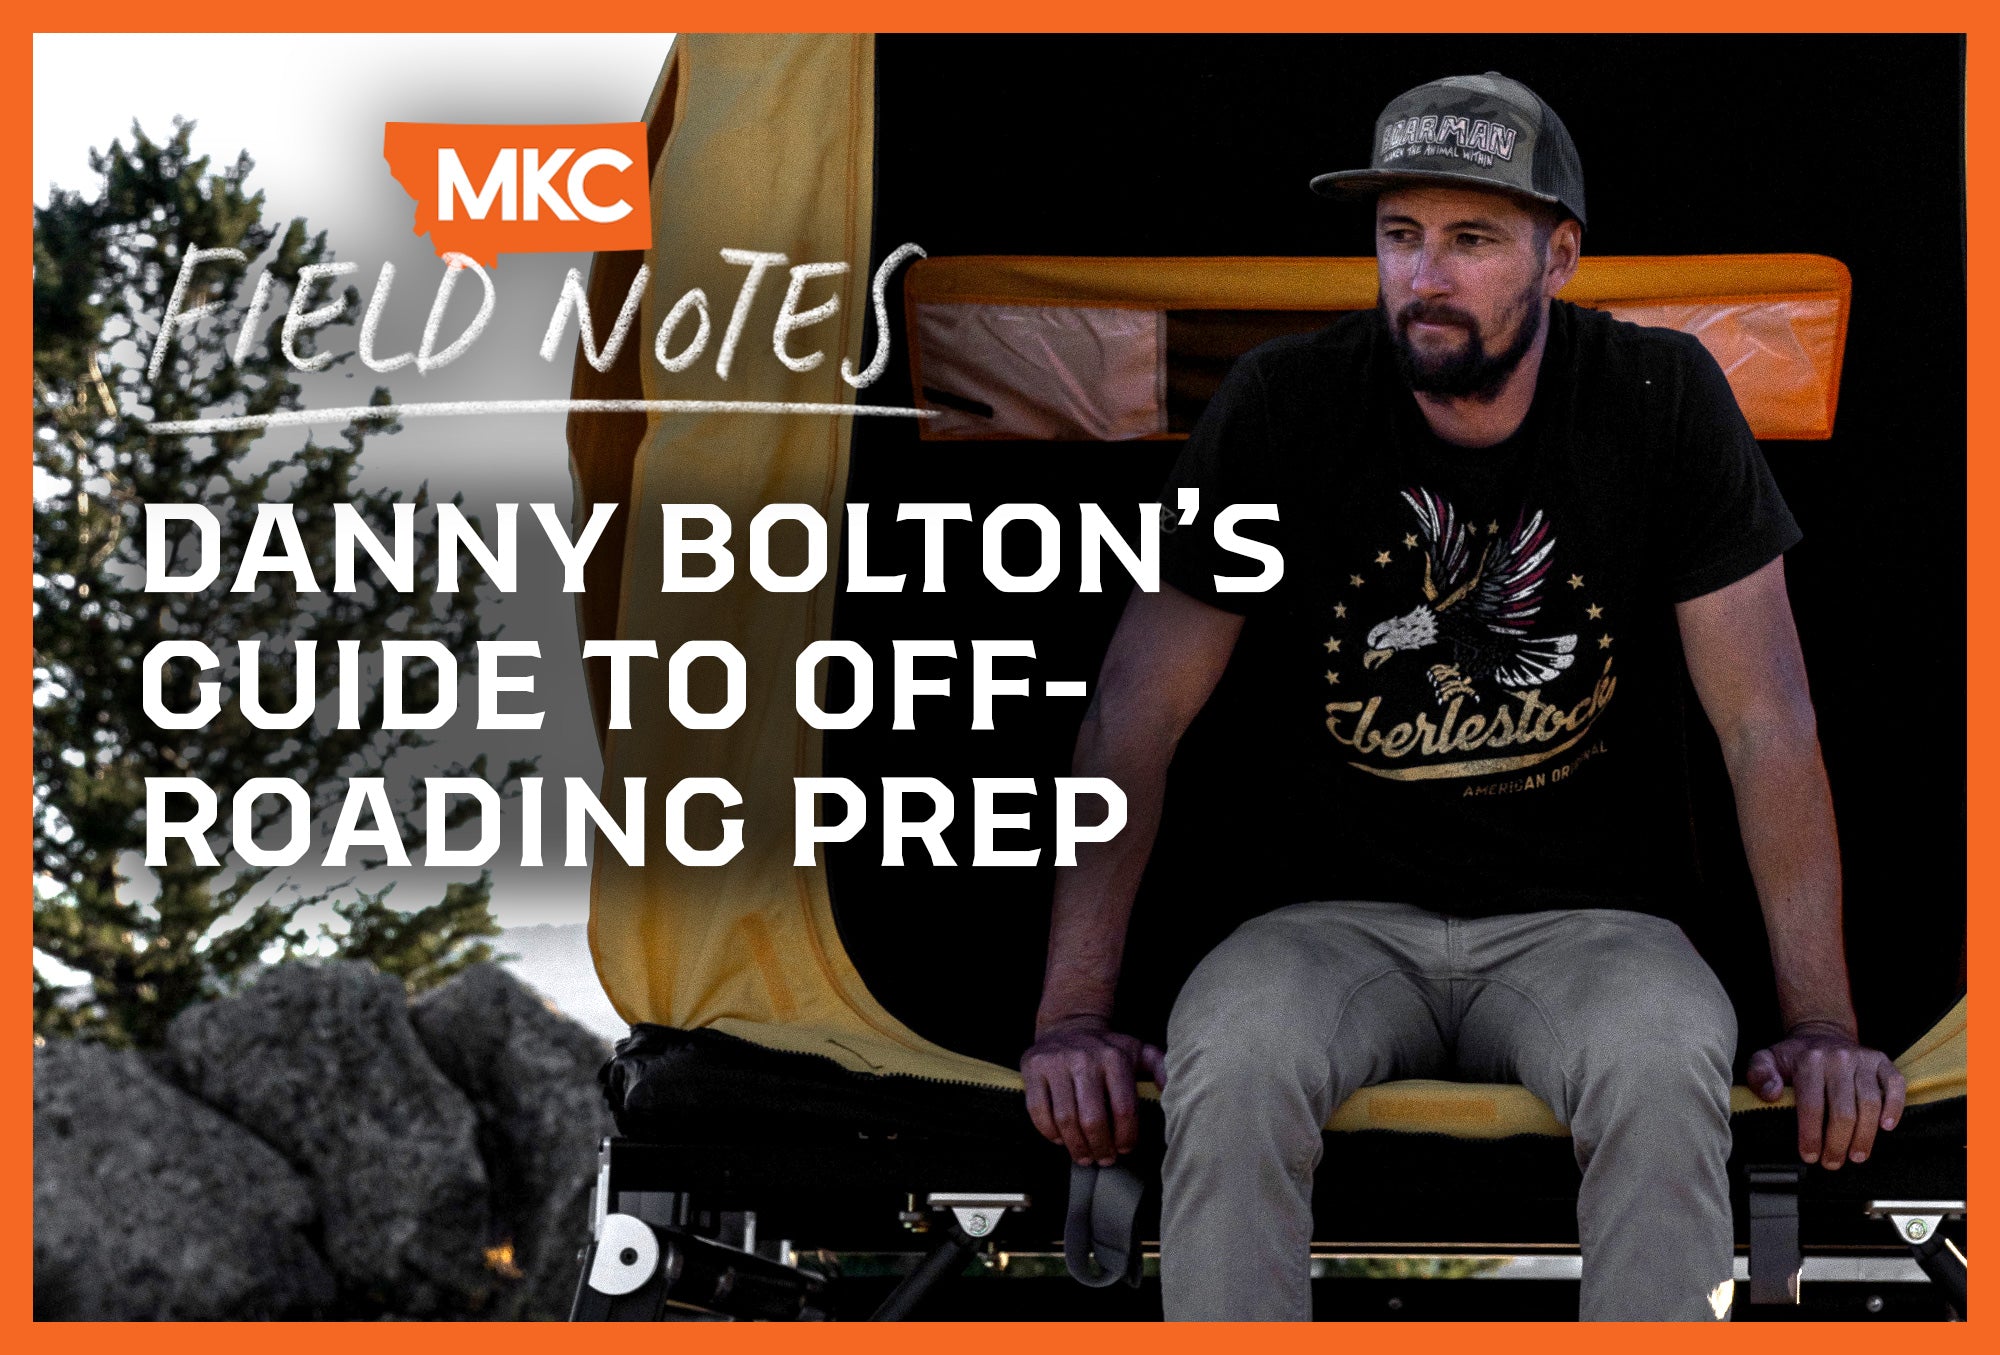 Danny Bolton sits on the open back of his off-roading vehicle after completing his top tips for off-roading prep.